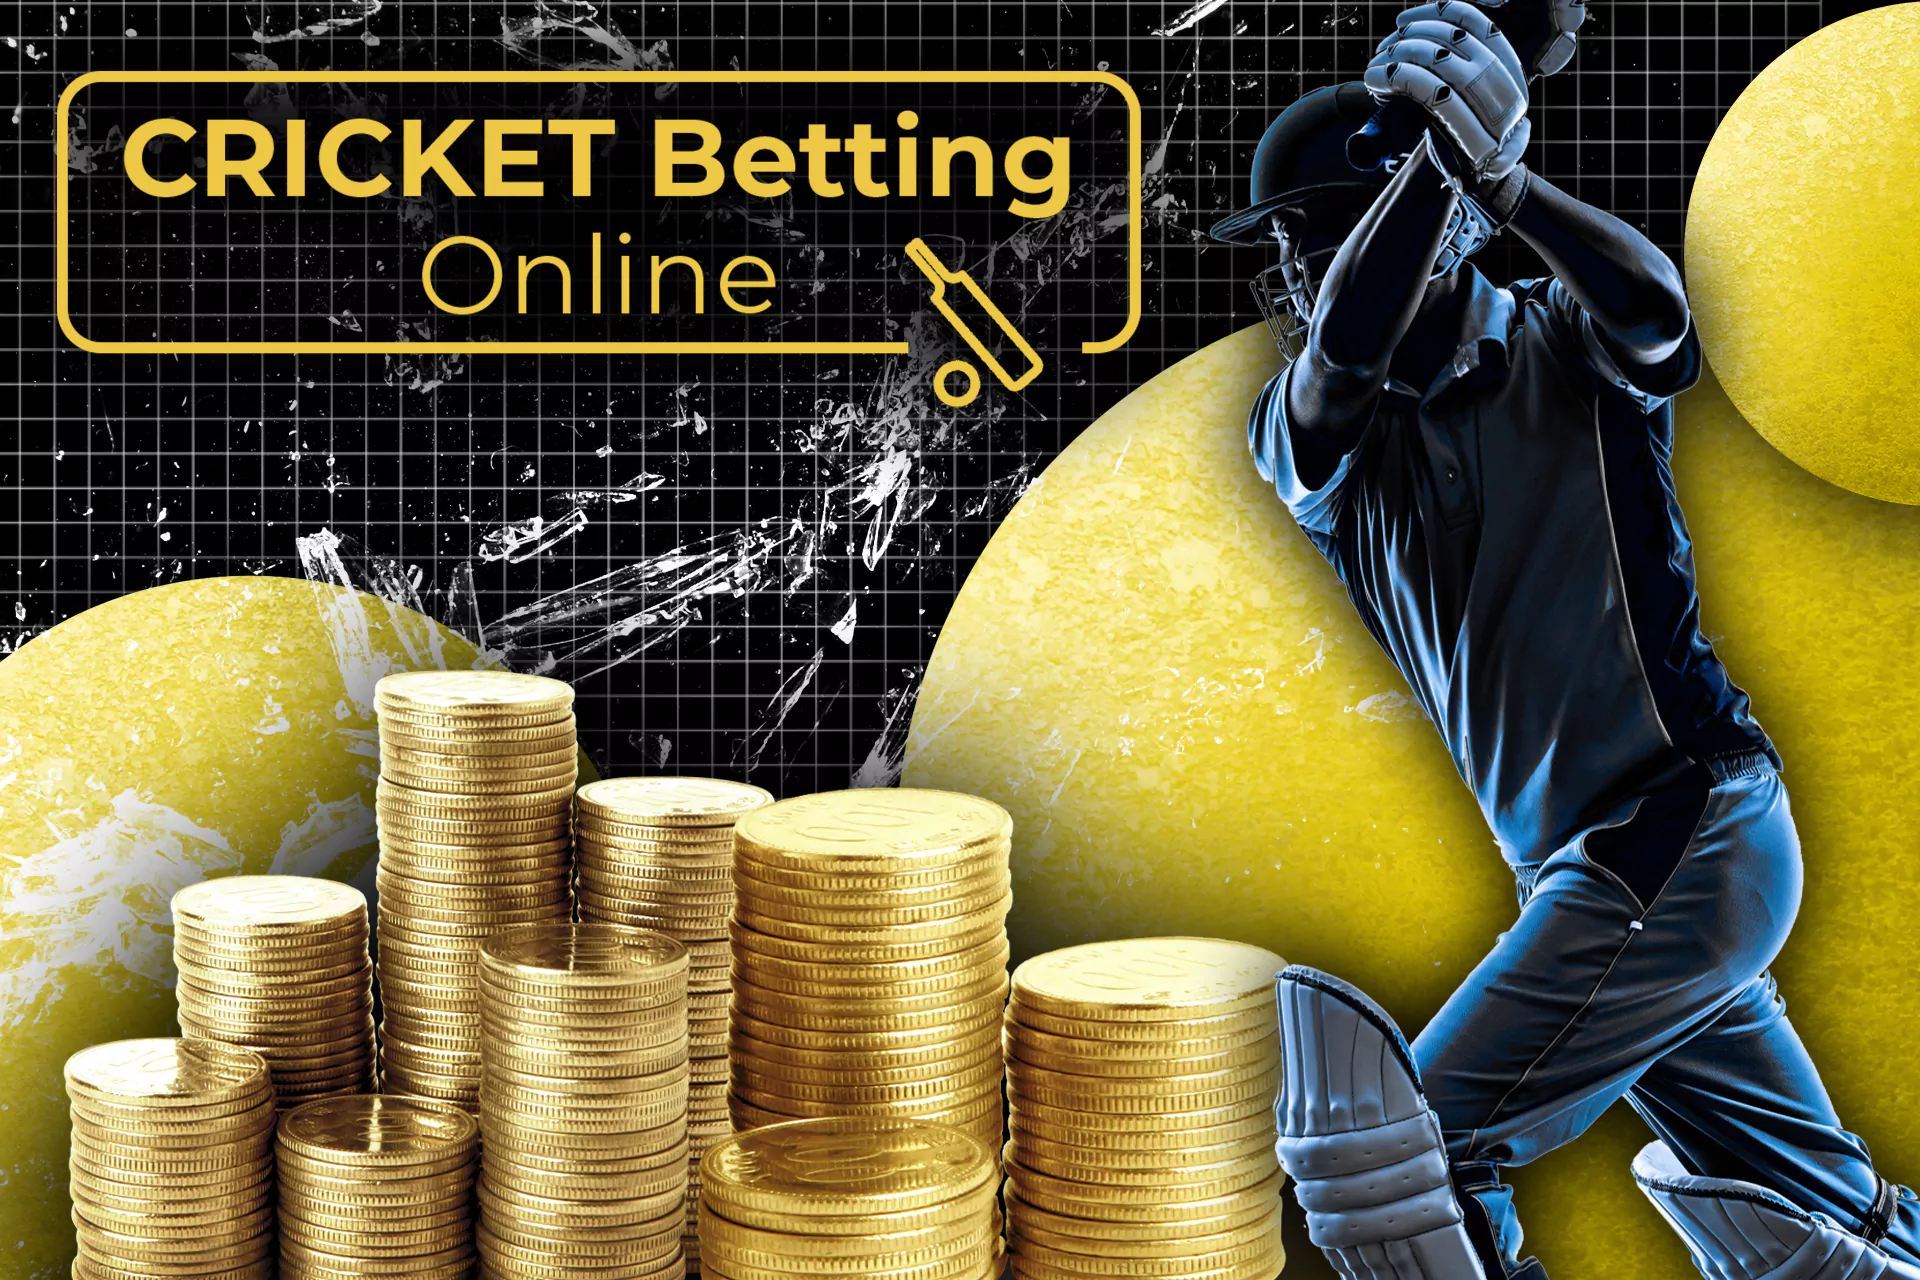 We welcome you on the site cricket-betting-online.in dedicated to online cricket betting: we know everything you need to bet online.